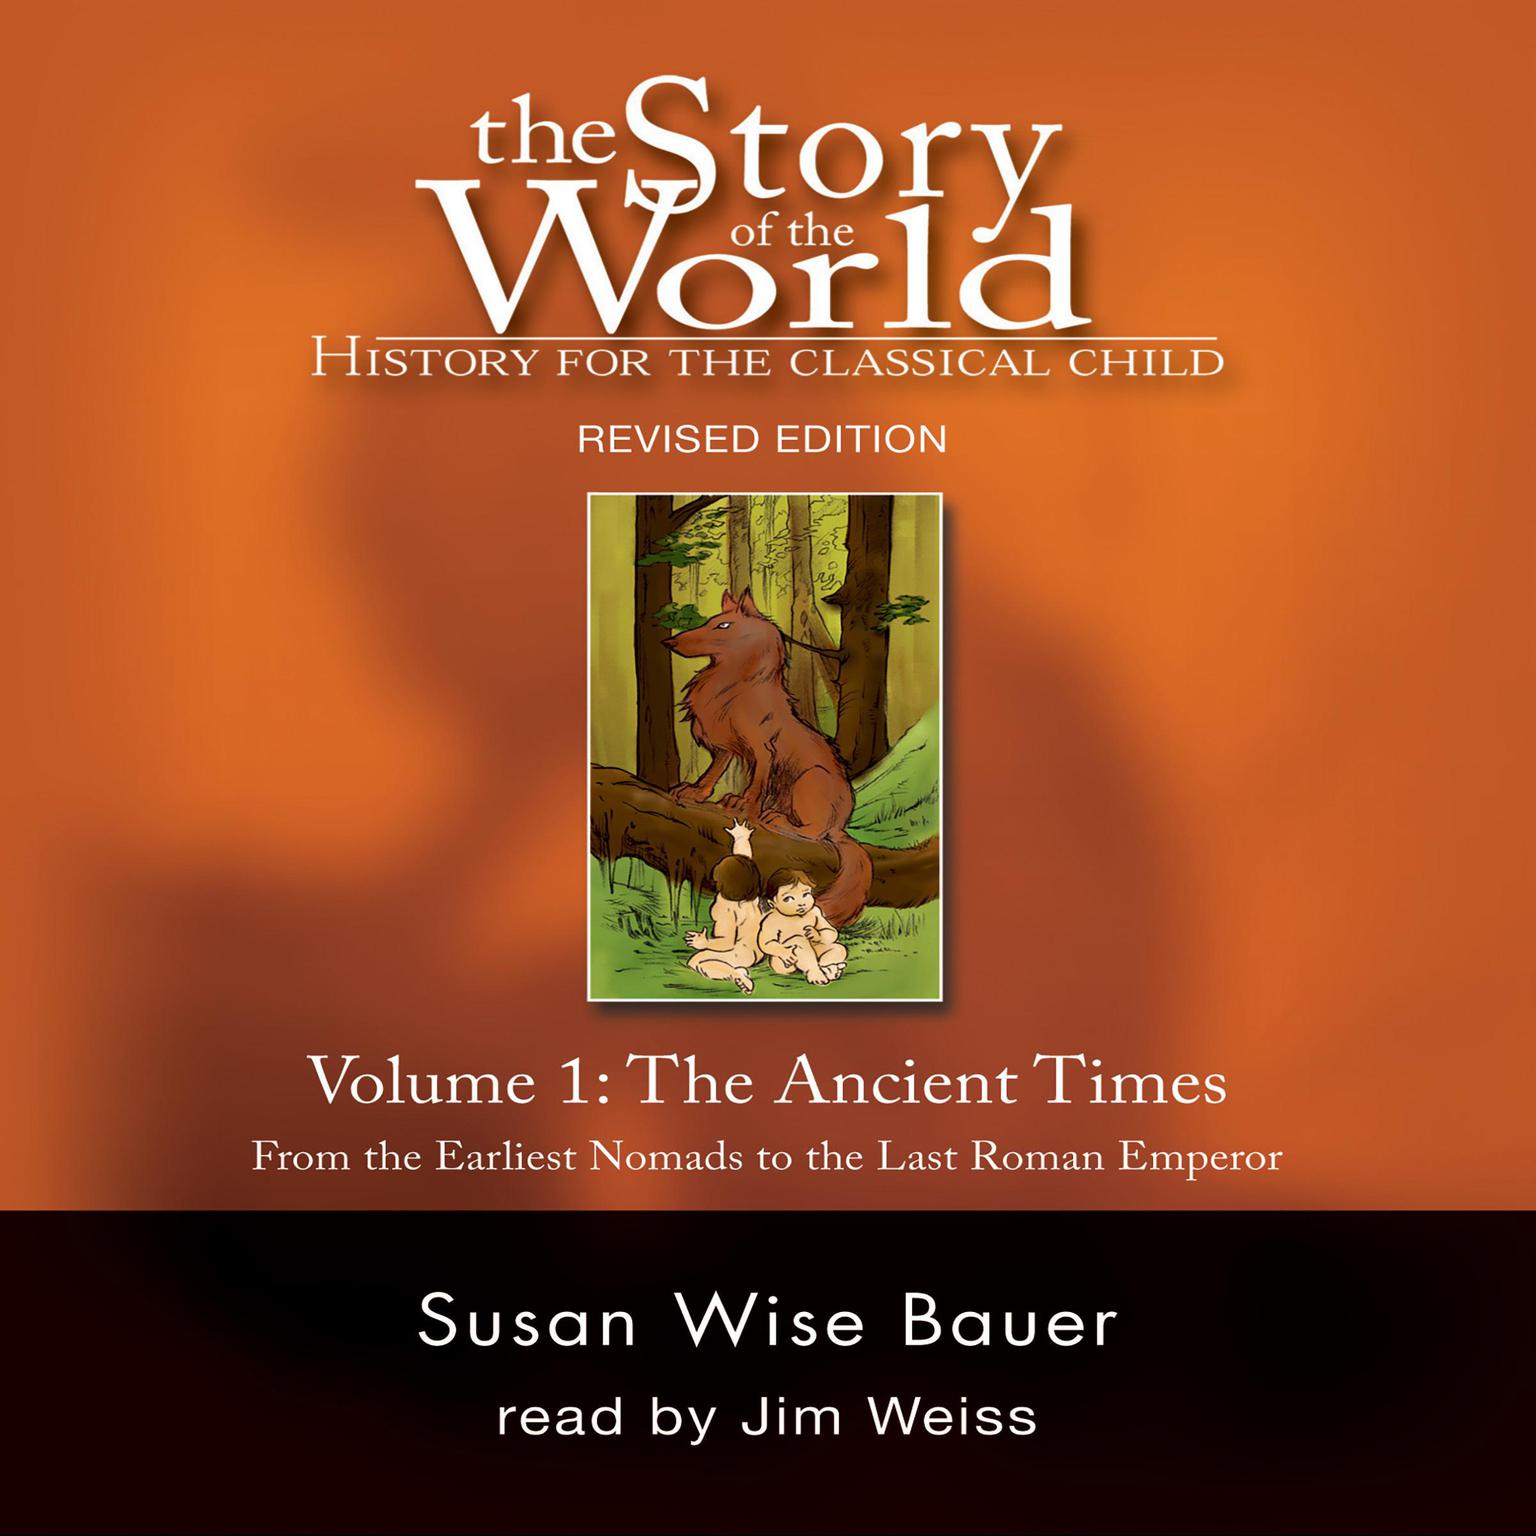 The Story of the World, Vol. 1 Audiobook Audiobook, by Susan Wise Bauer